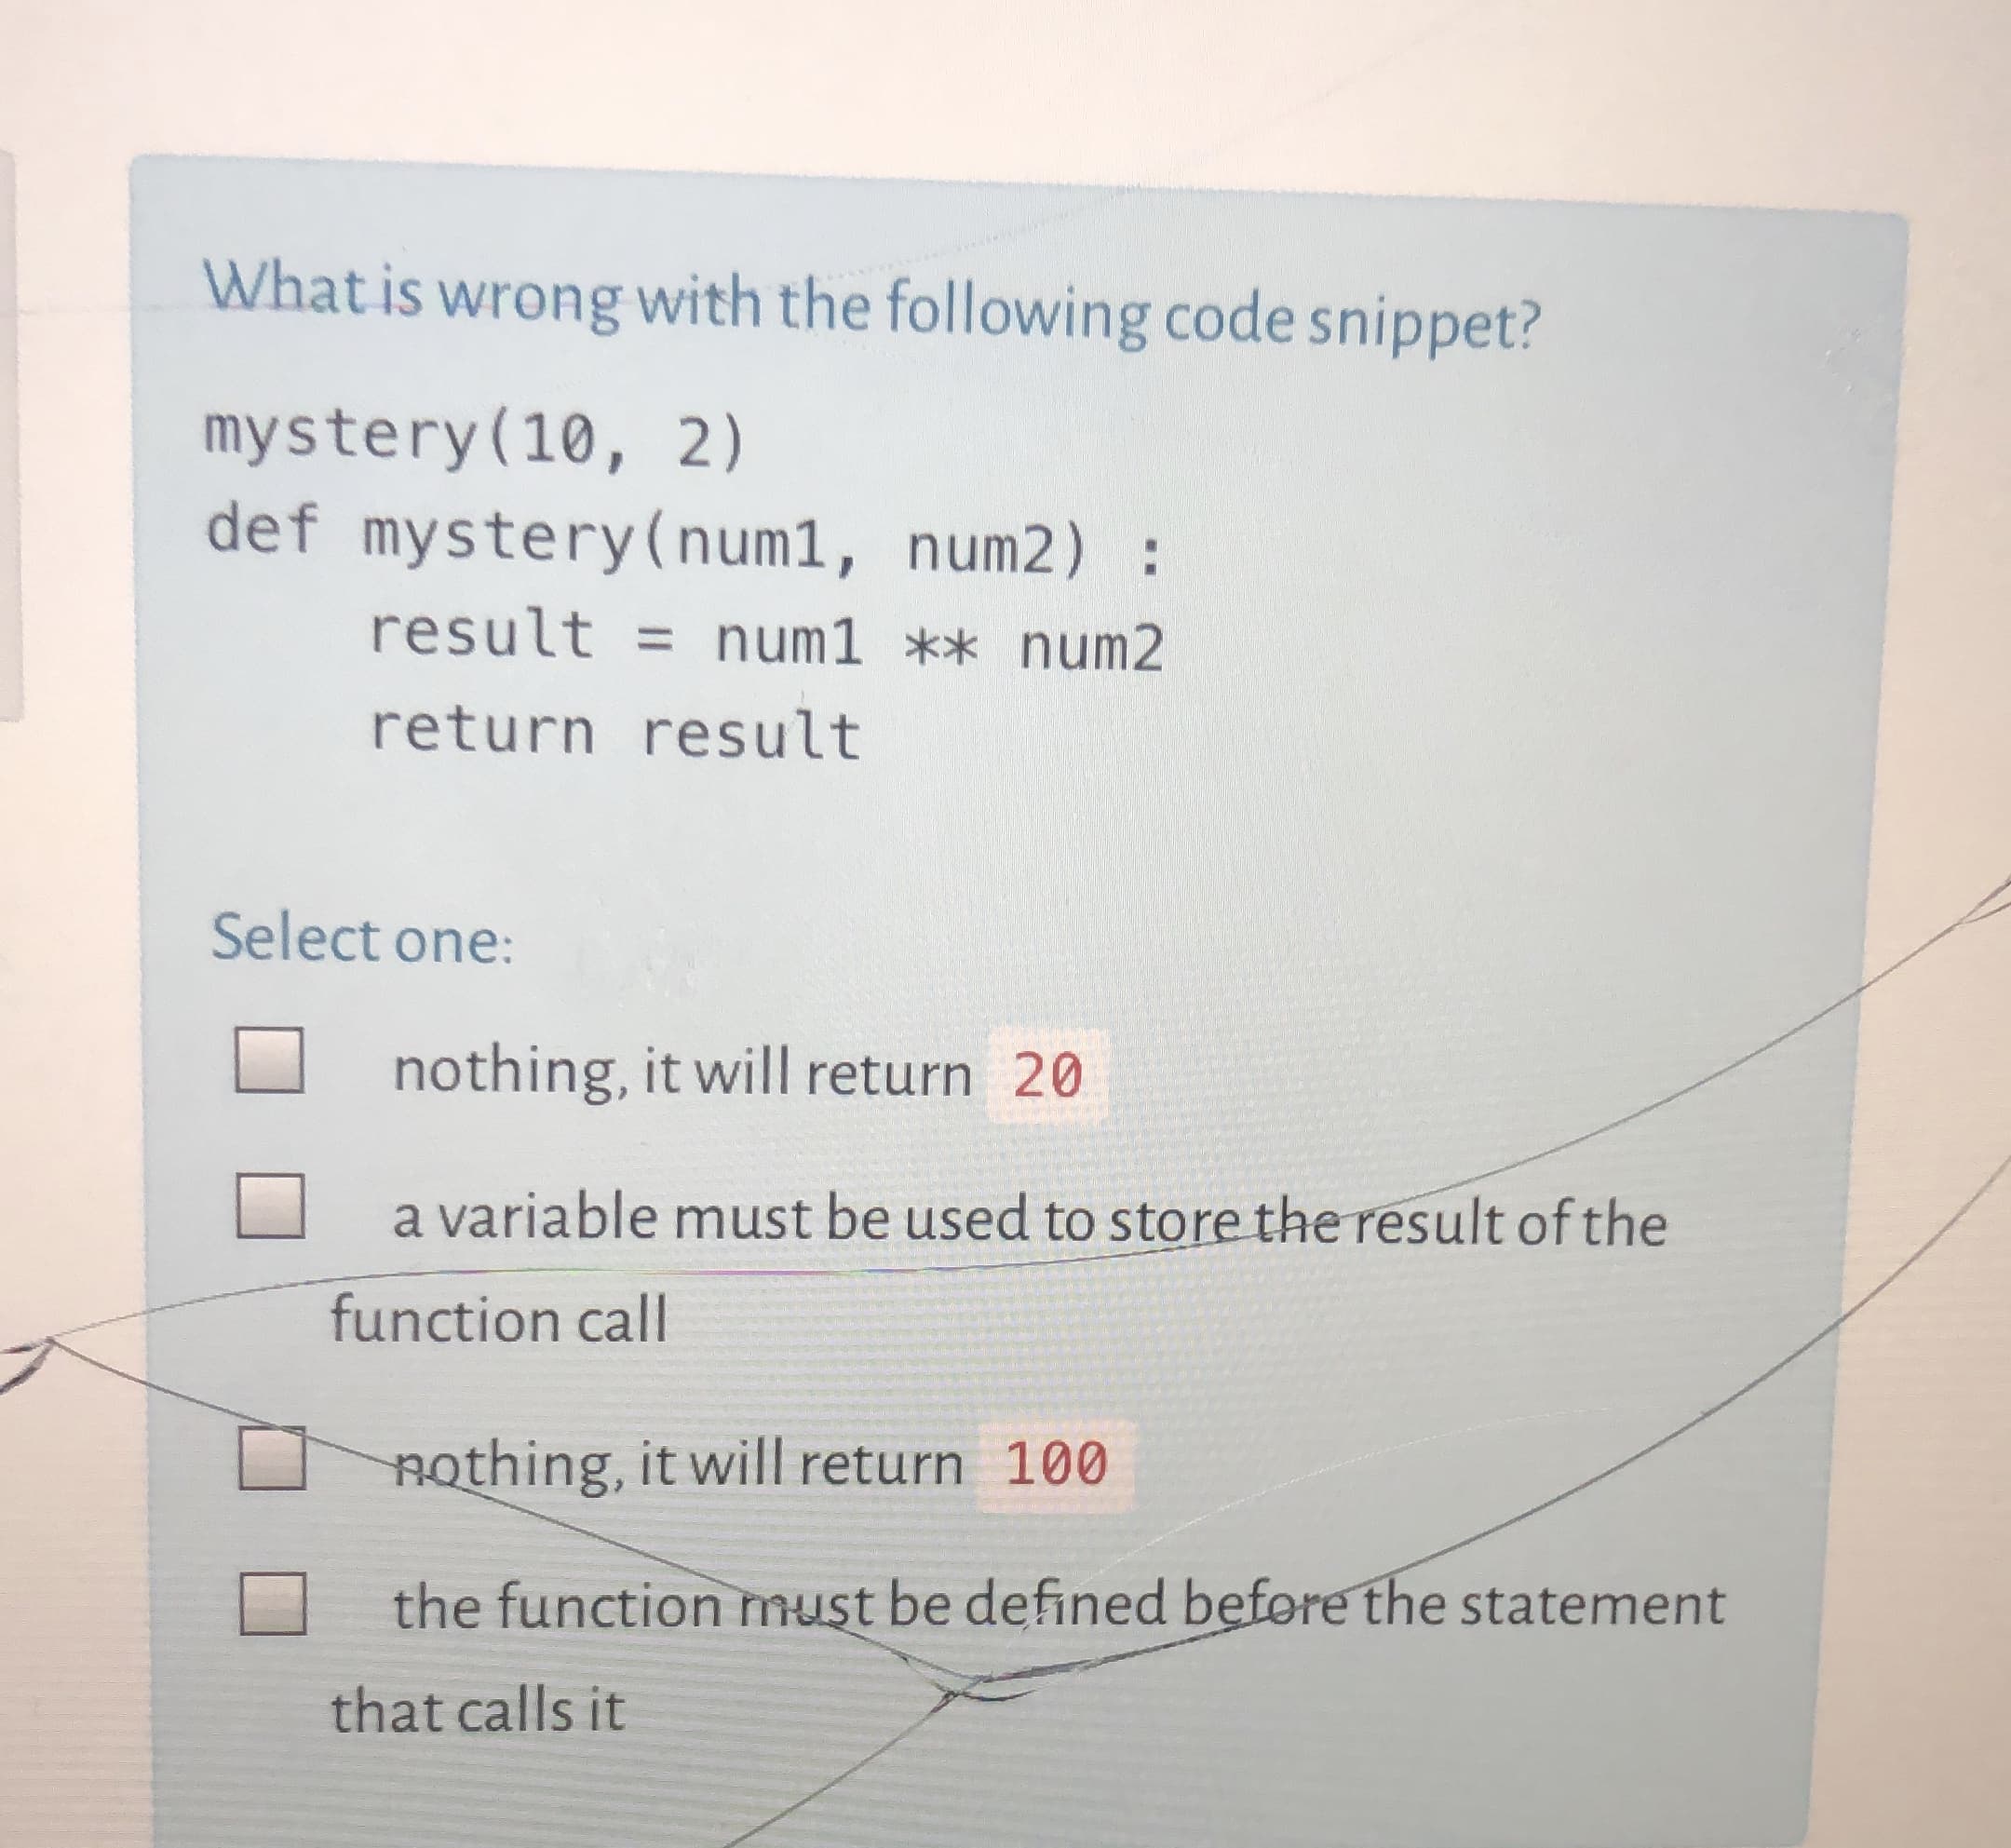 What is wrong with the following code snippet?
mystery(10, 2)
def mystery(num1, num2) :
result = num1 ** num2
return result
Select one:
nothing, it will return 20
a variable must be used to store the result of the
function call
nothing, it will return 100
the function must be defined before the statement
that calls it
